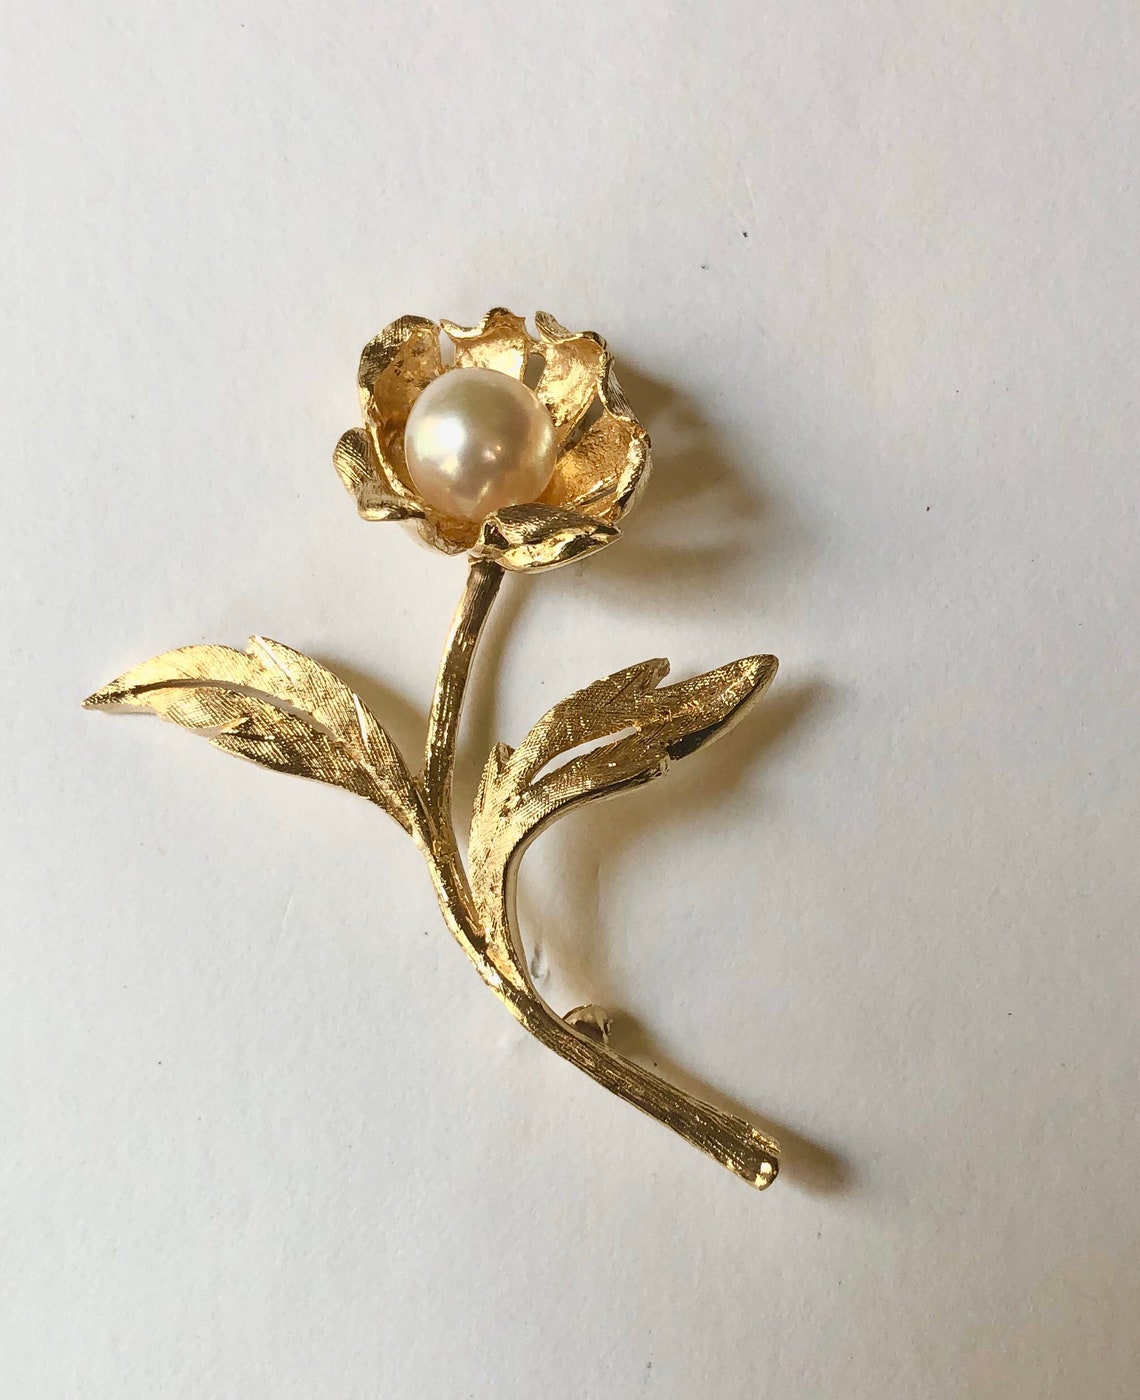 Stunning 14k Gold Poppy Pin With Pearl - Etsy